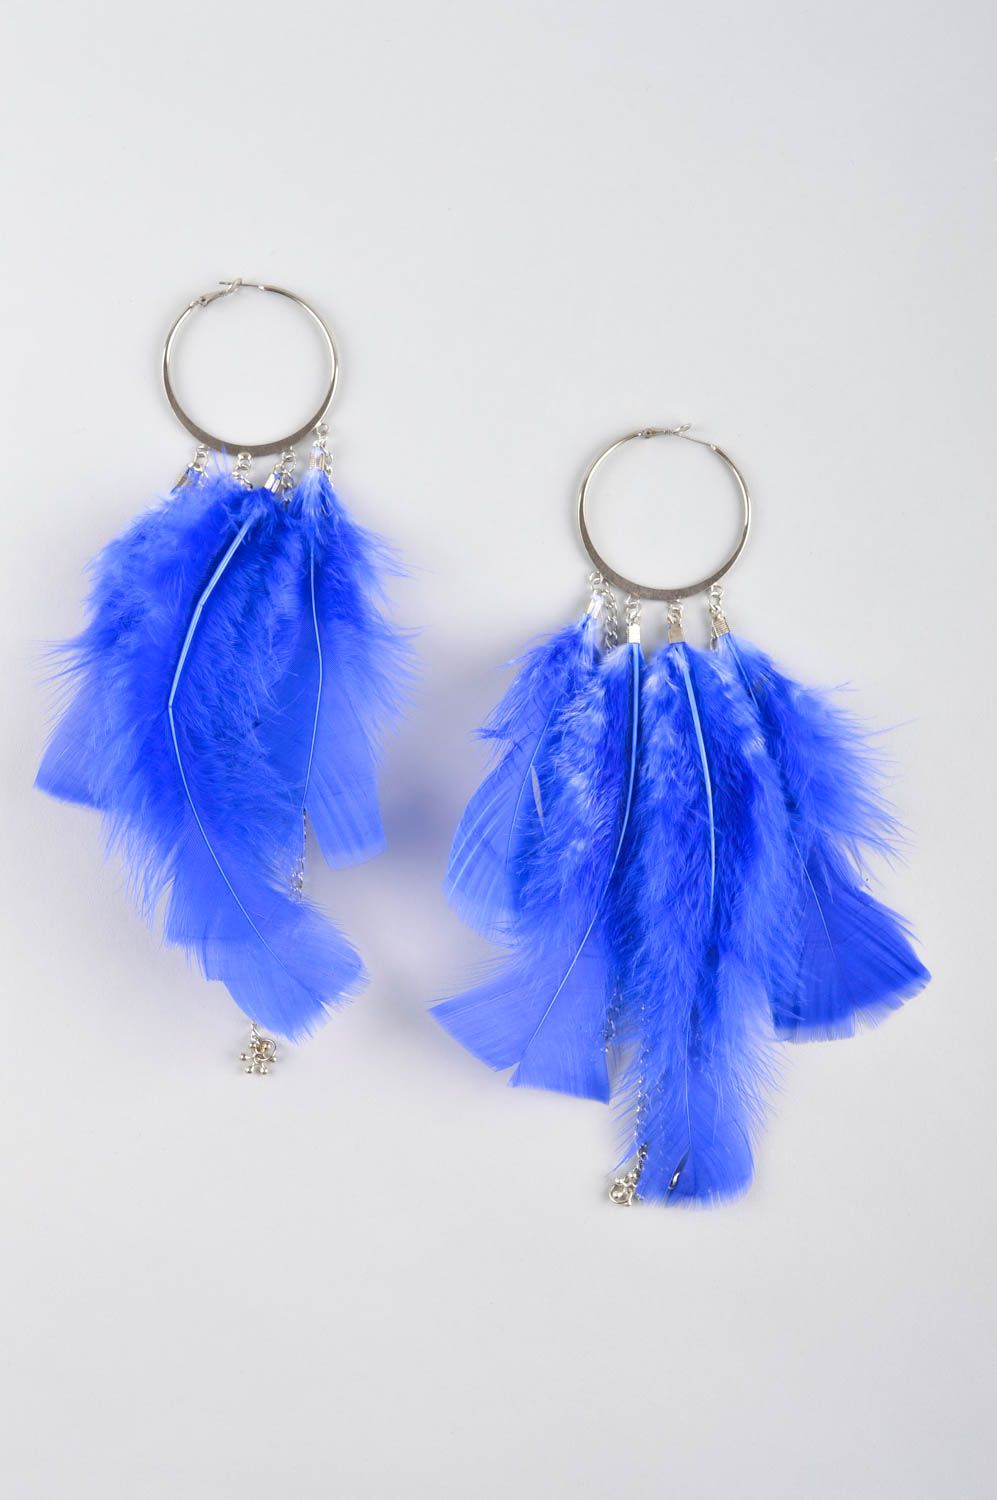 Handcrafted jewelry designer earrings feather earrings for girls cool gifts photo 2